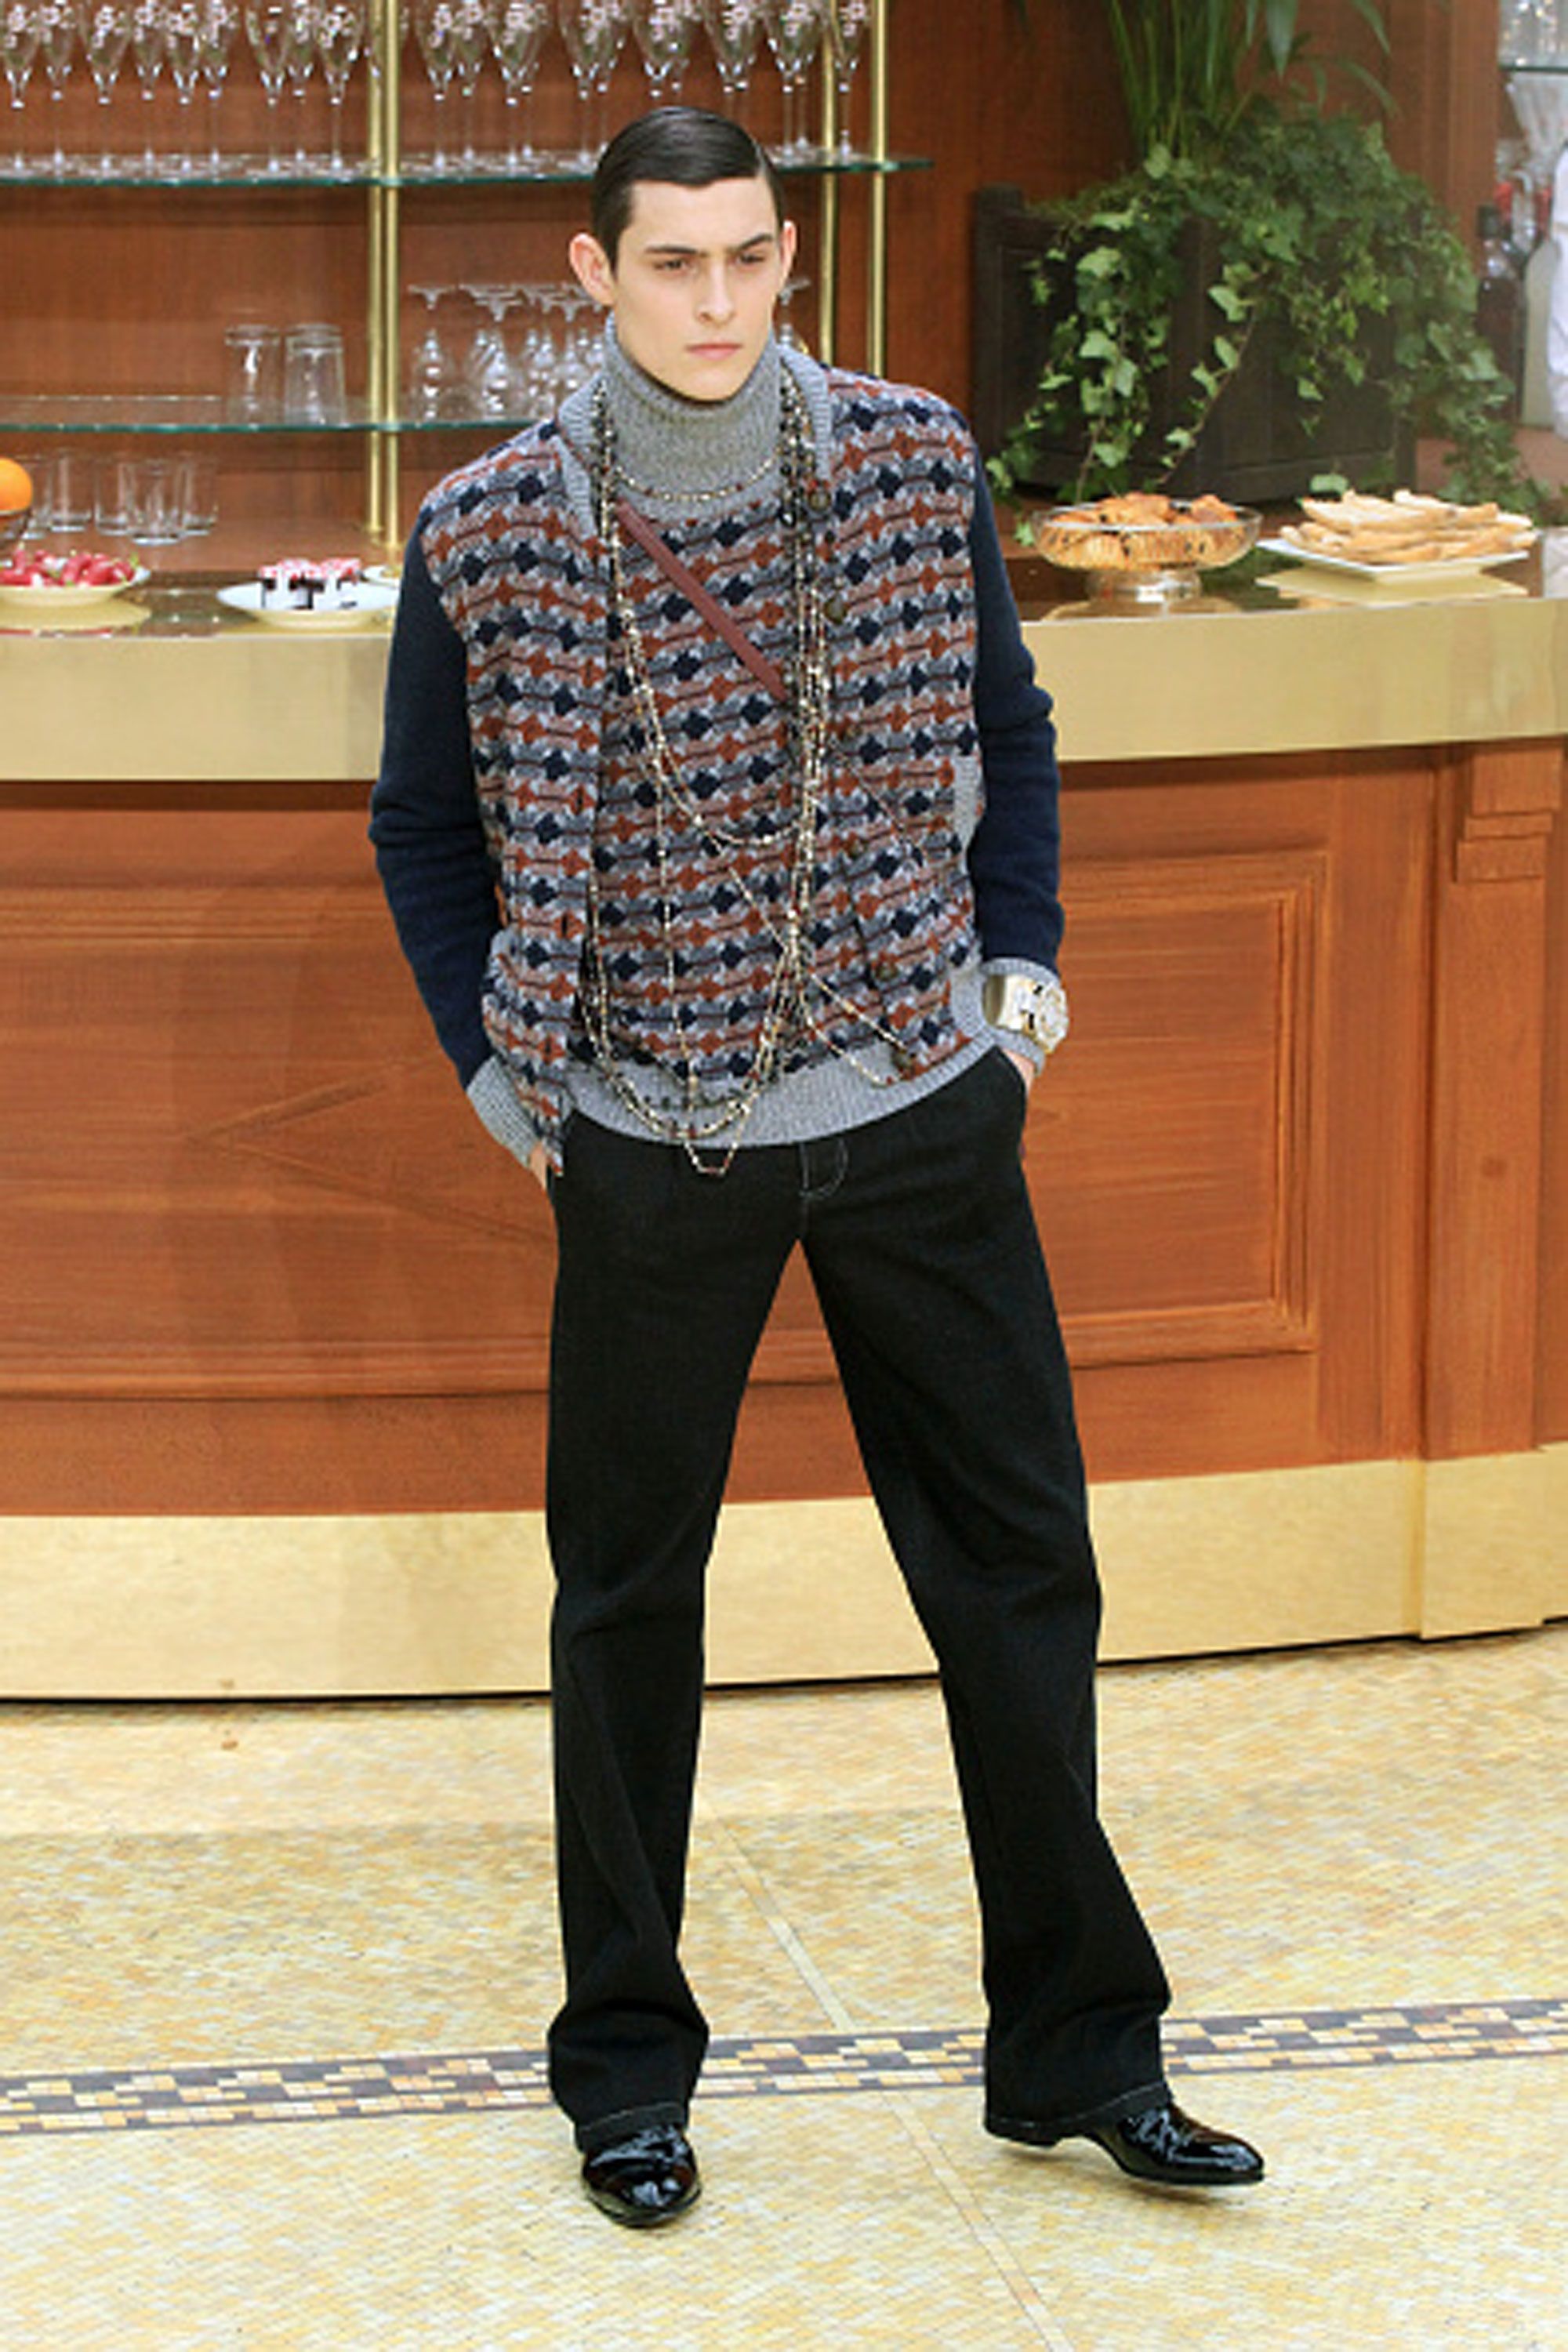 Mens Chanel Clothing | vlr.eng.br